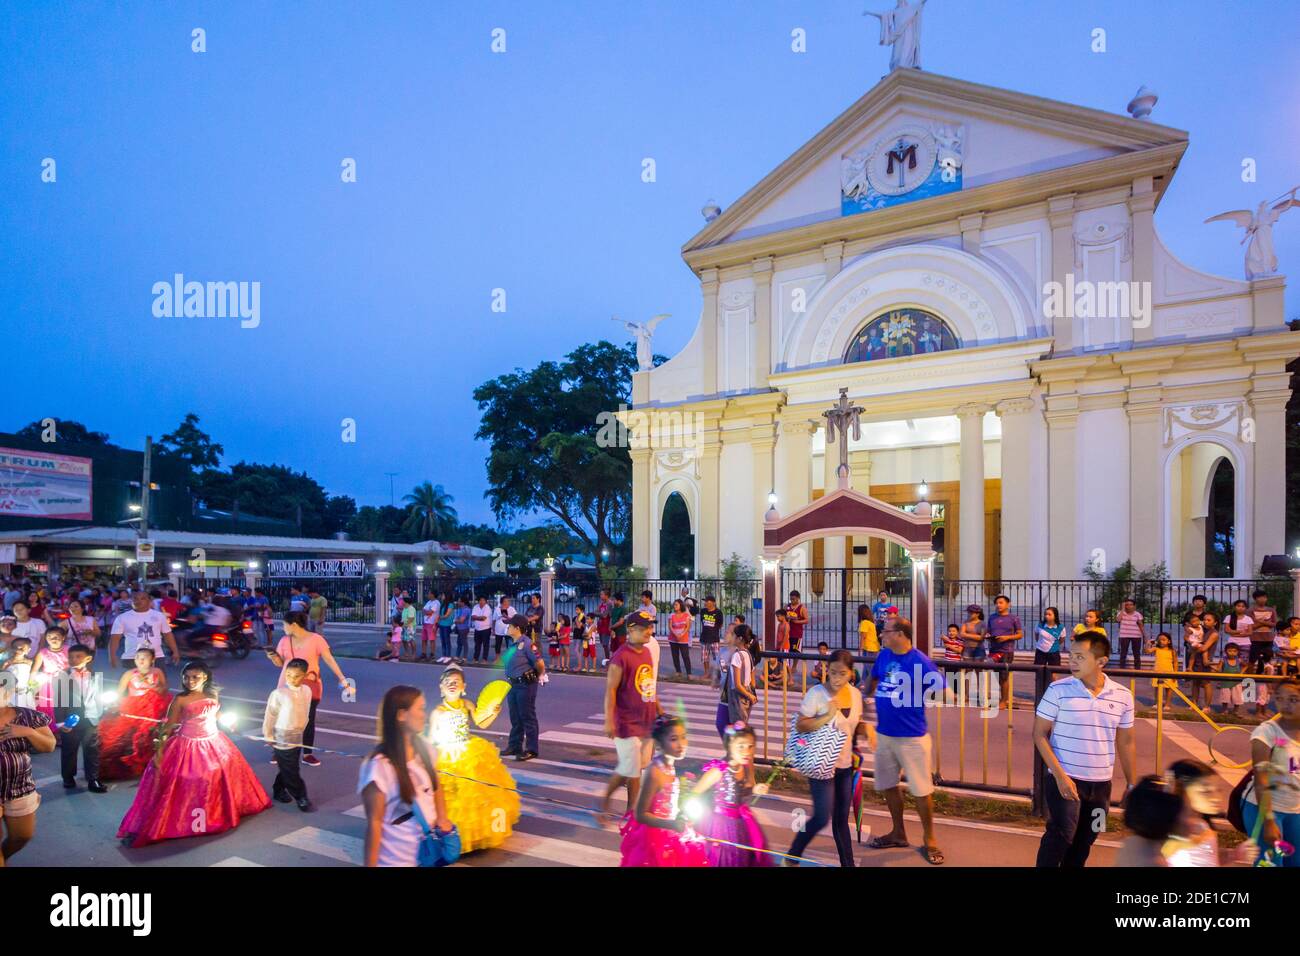 Facade of Alitagtag Church during the May Flower Tapusan Festival in Batangas, Phlippines Stock Photo